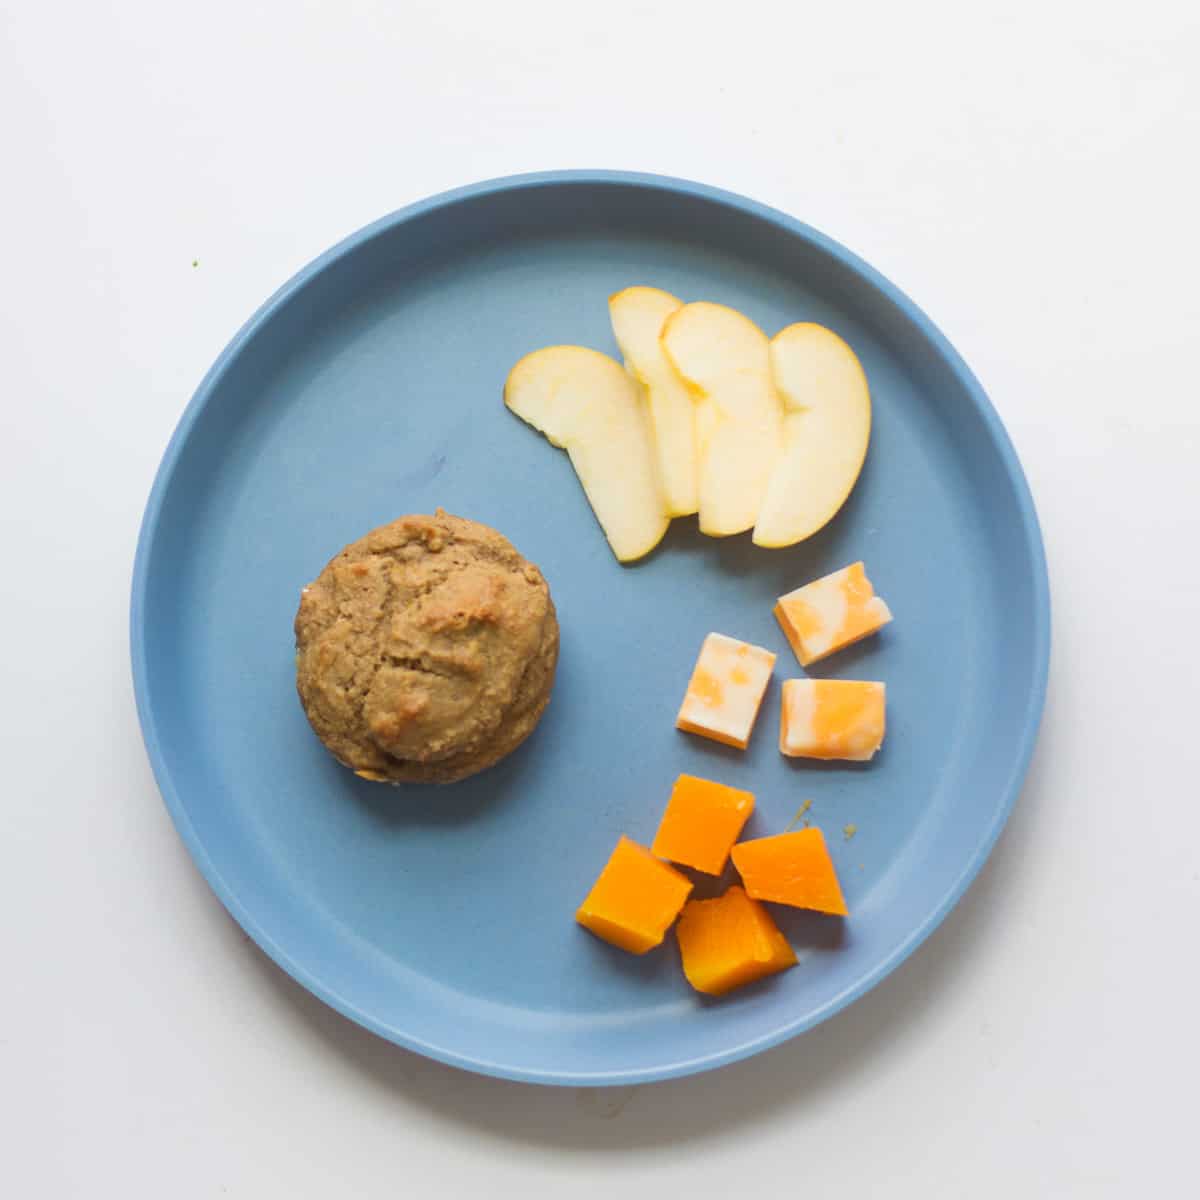 A whole muffin, apple slices, cubed cheese, and butternut squash.